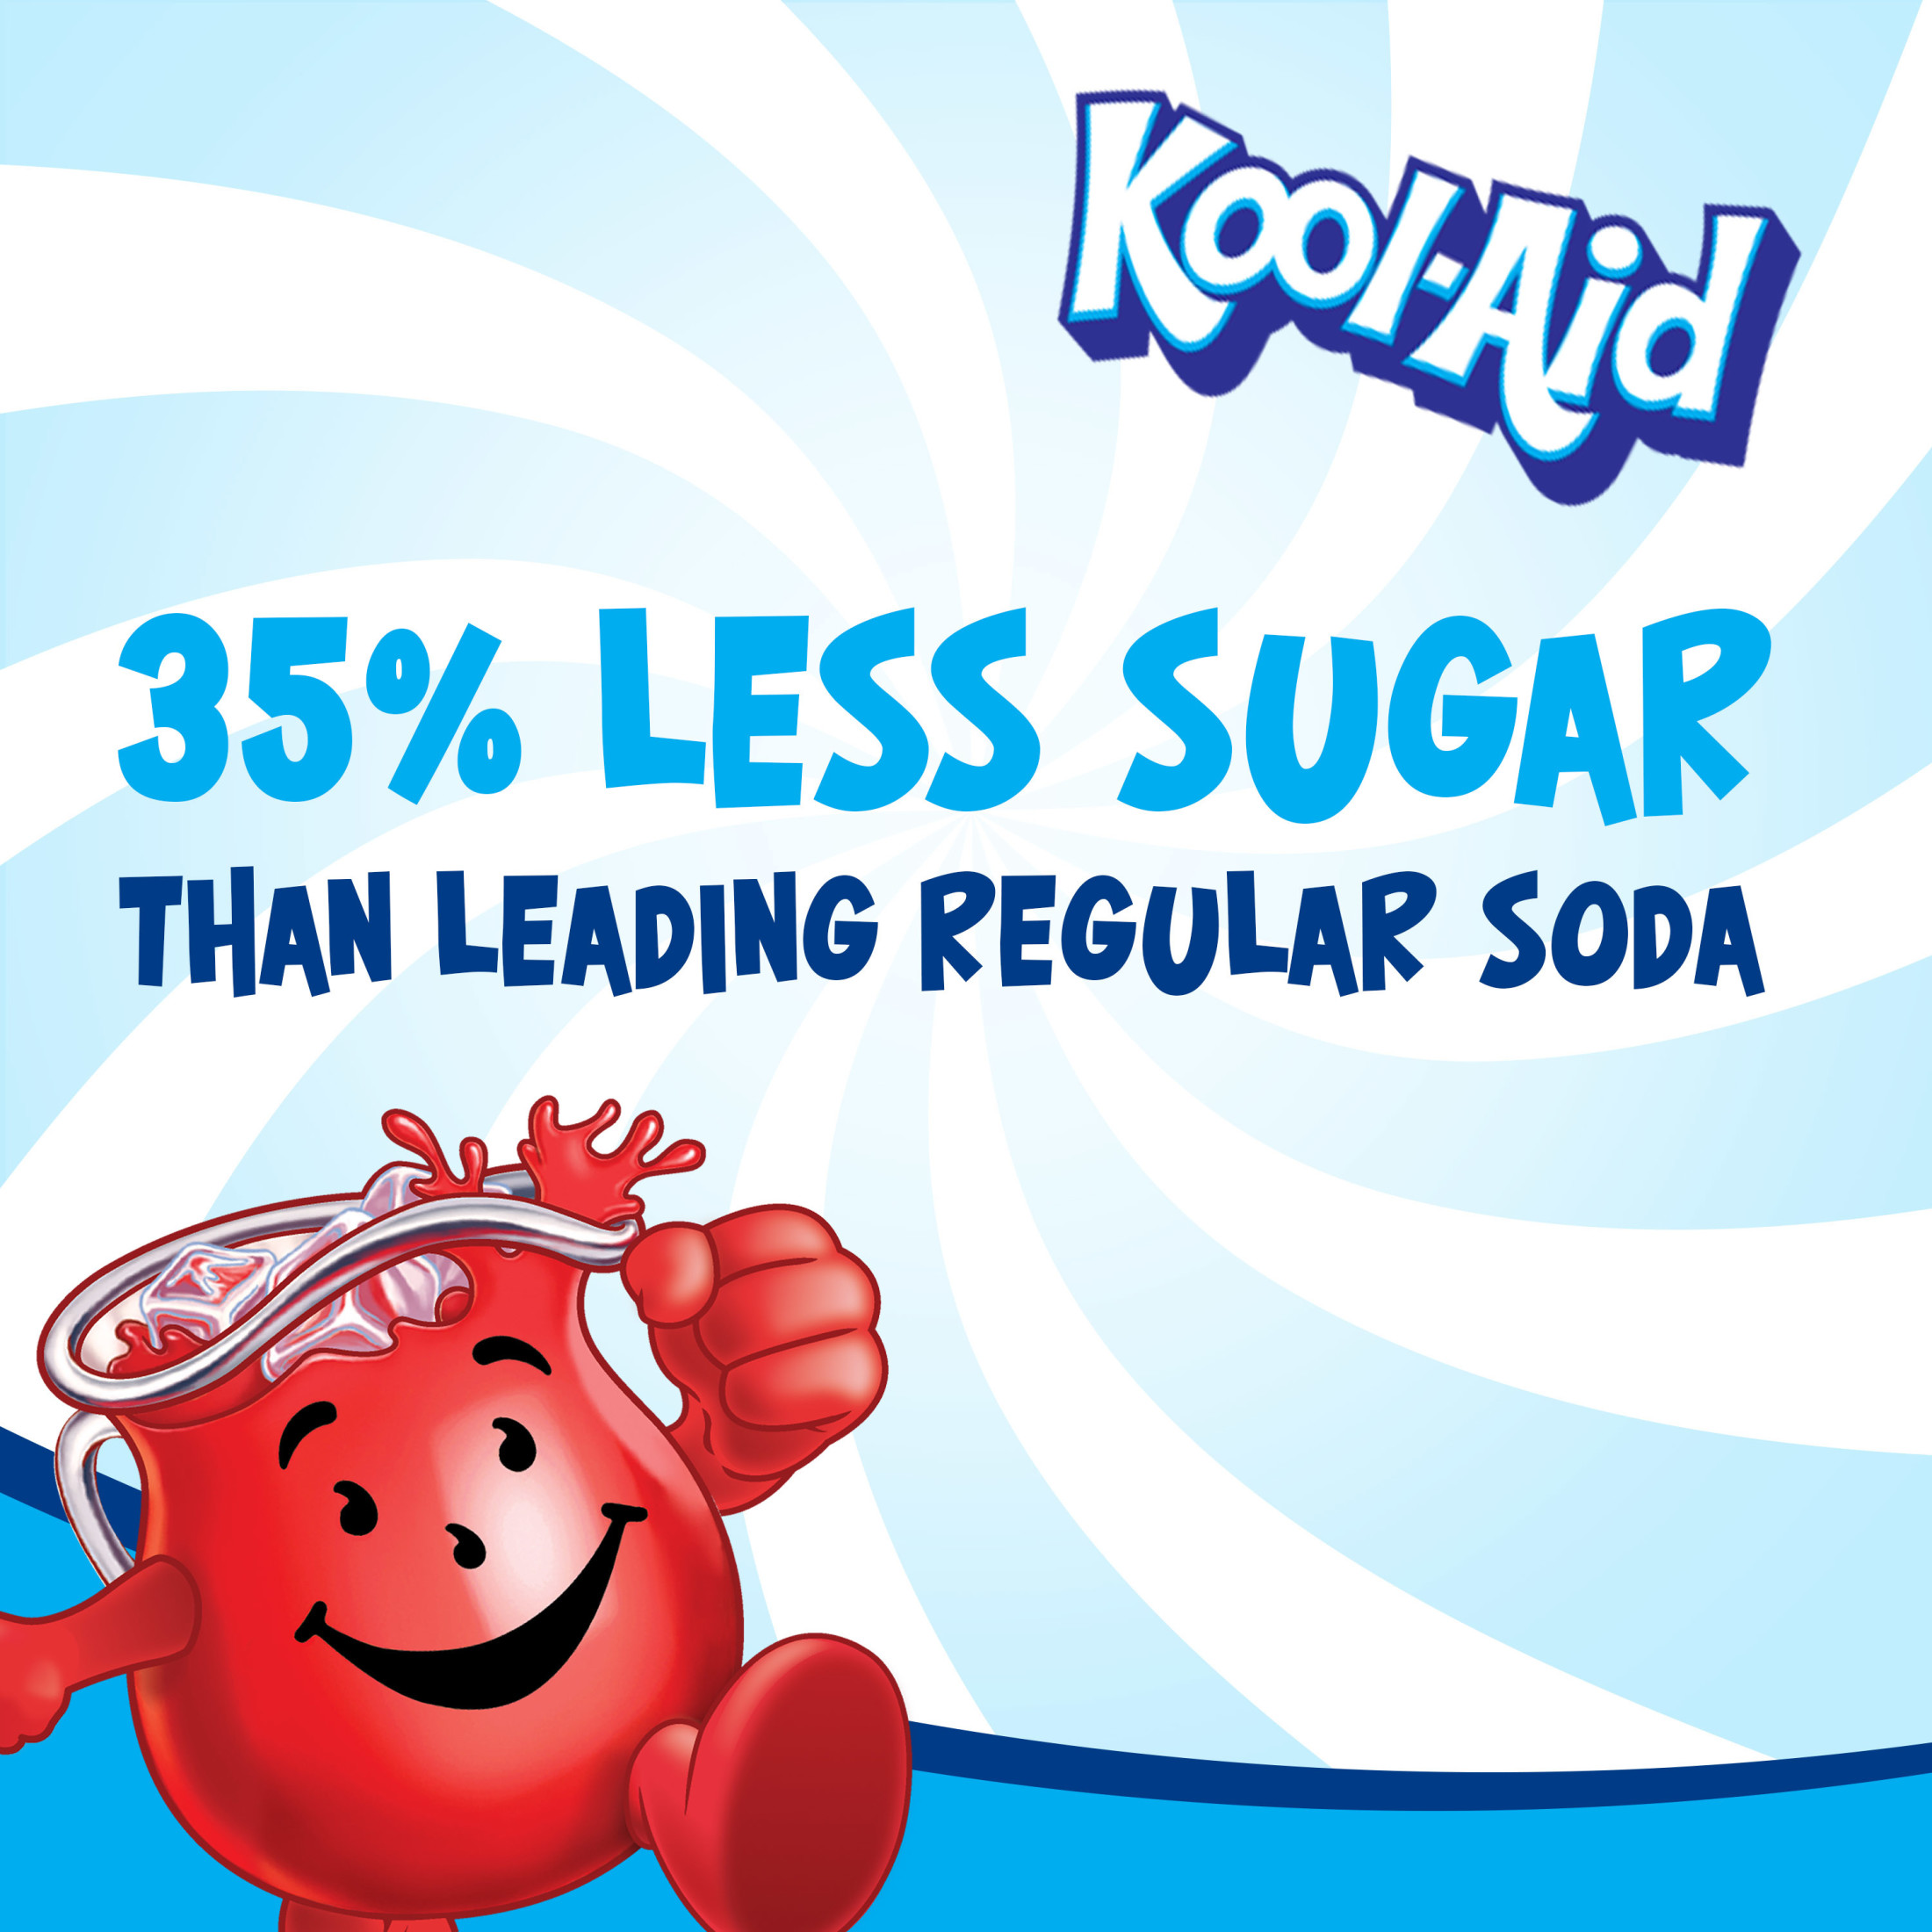 Kool-Aid Sugar Sweetened Tropical Punch Artificially Flavored Powdered Drink Mix, 19 oz. Canister - image 5 of 11